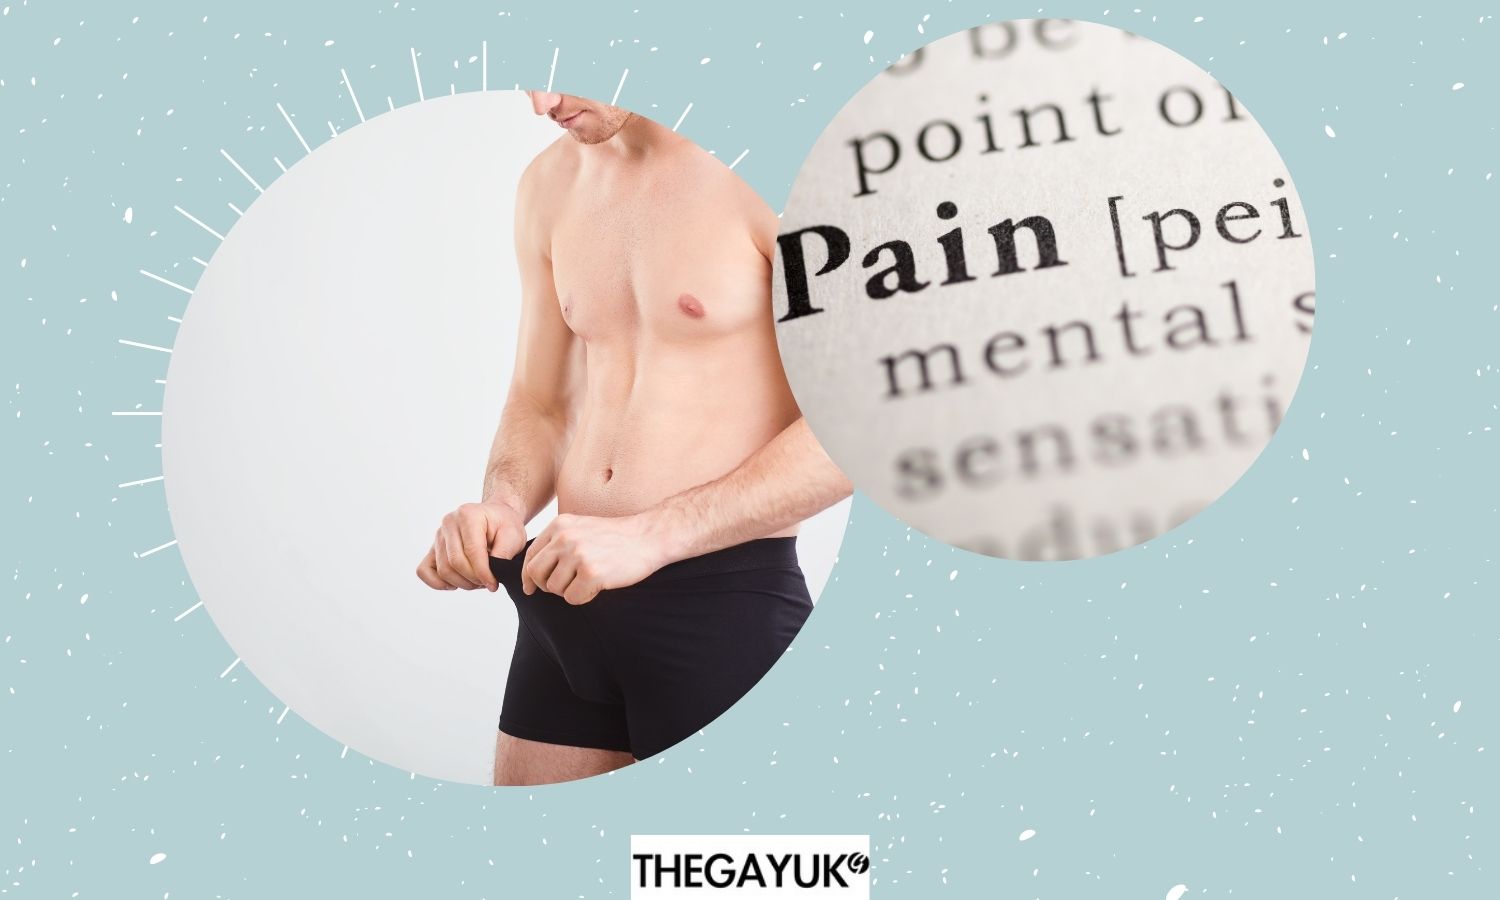 ADVICE | I have achy balls, what should I do?